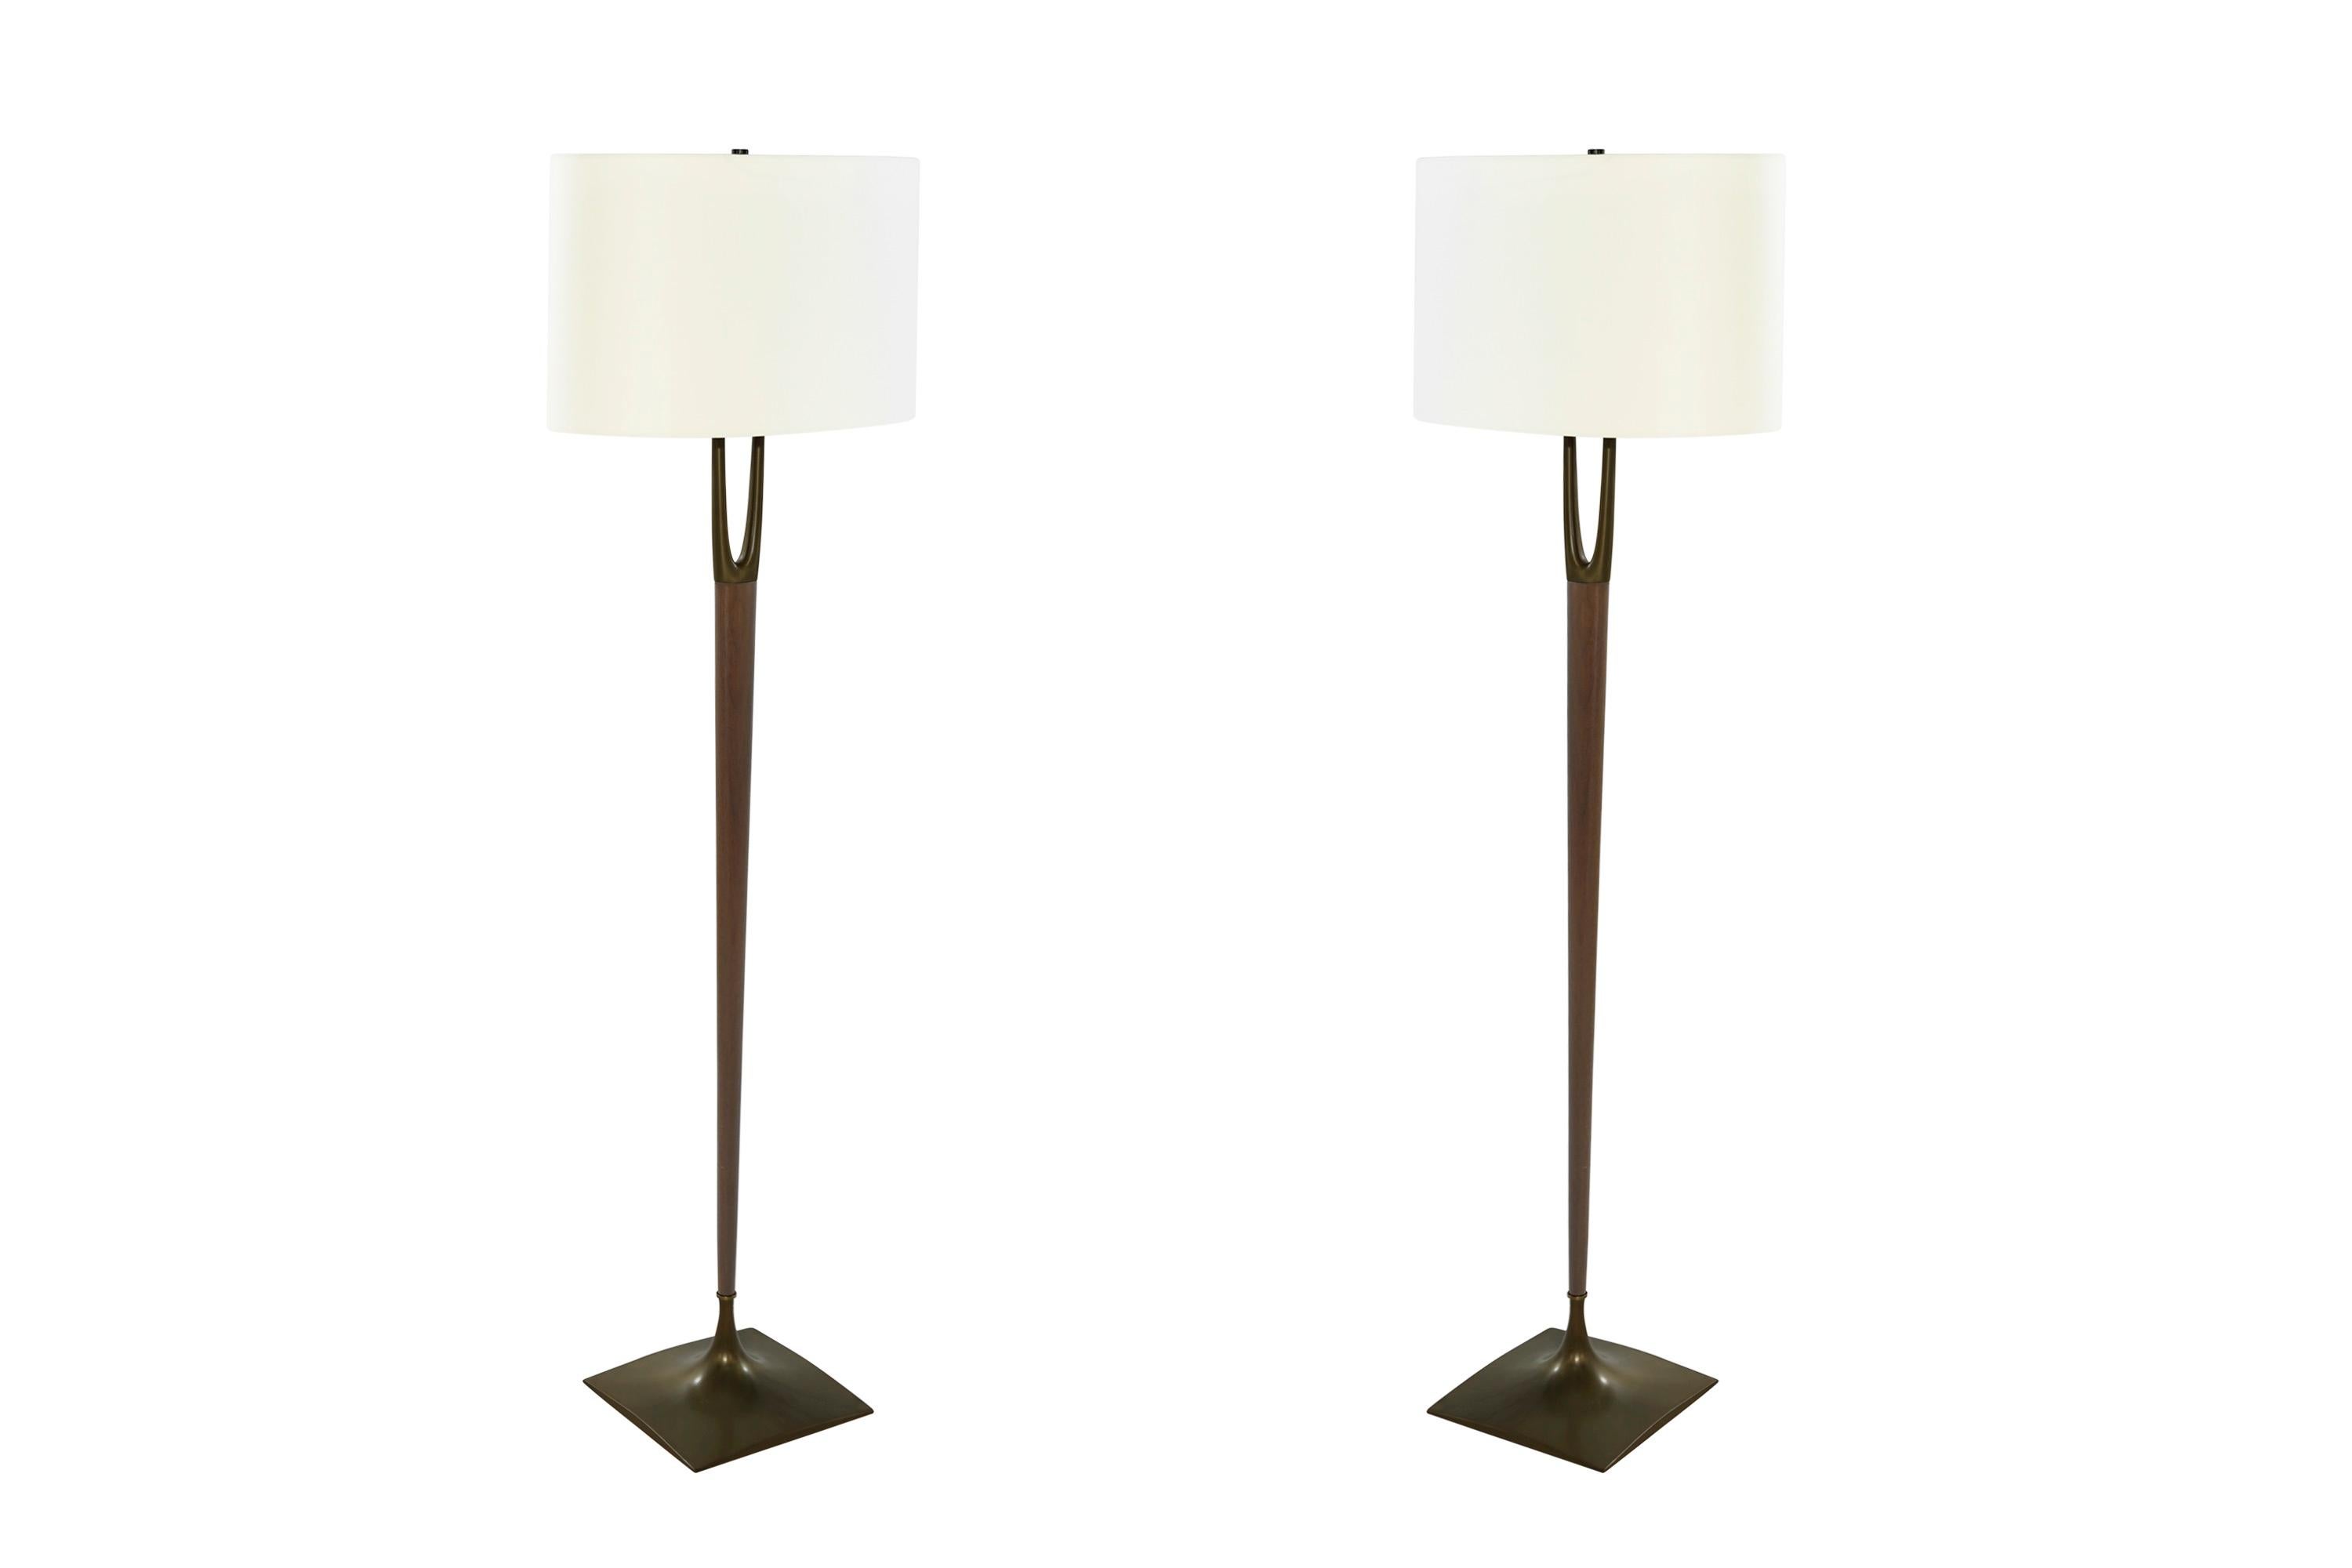 A historic set of floor lamps designed by Harold Weiss & Richard Barr, manufactured by Laurel Lamp Co., in the 1960s. 

Walnut fully restored to match their original natural walnut finish, formerly brass plated stand and top updated in bronze with